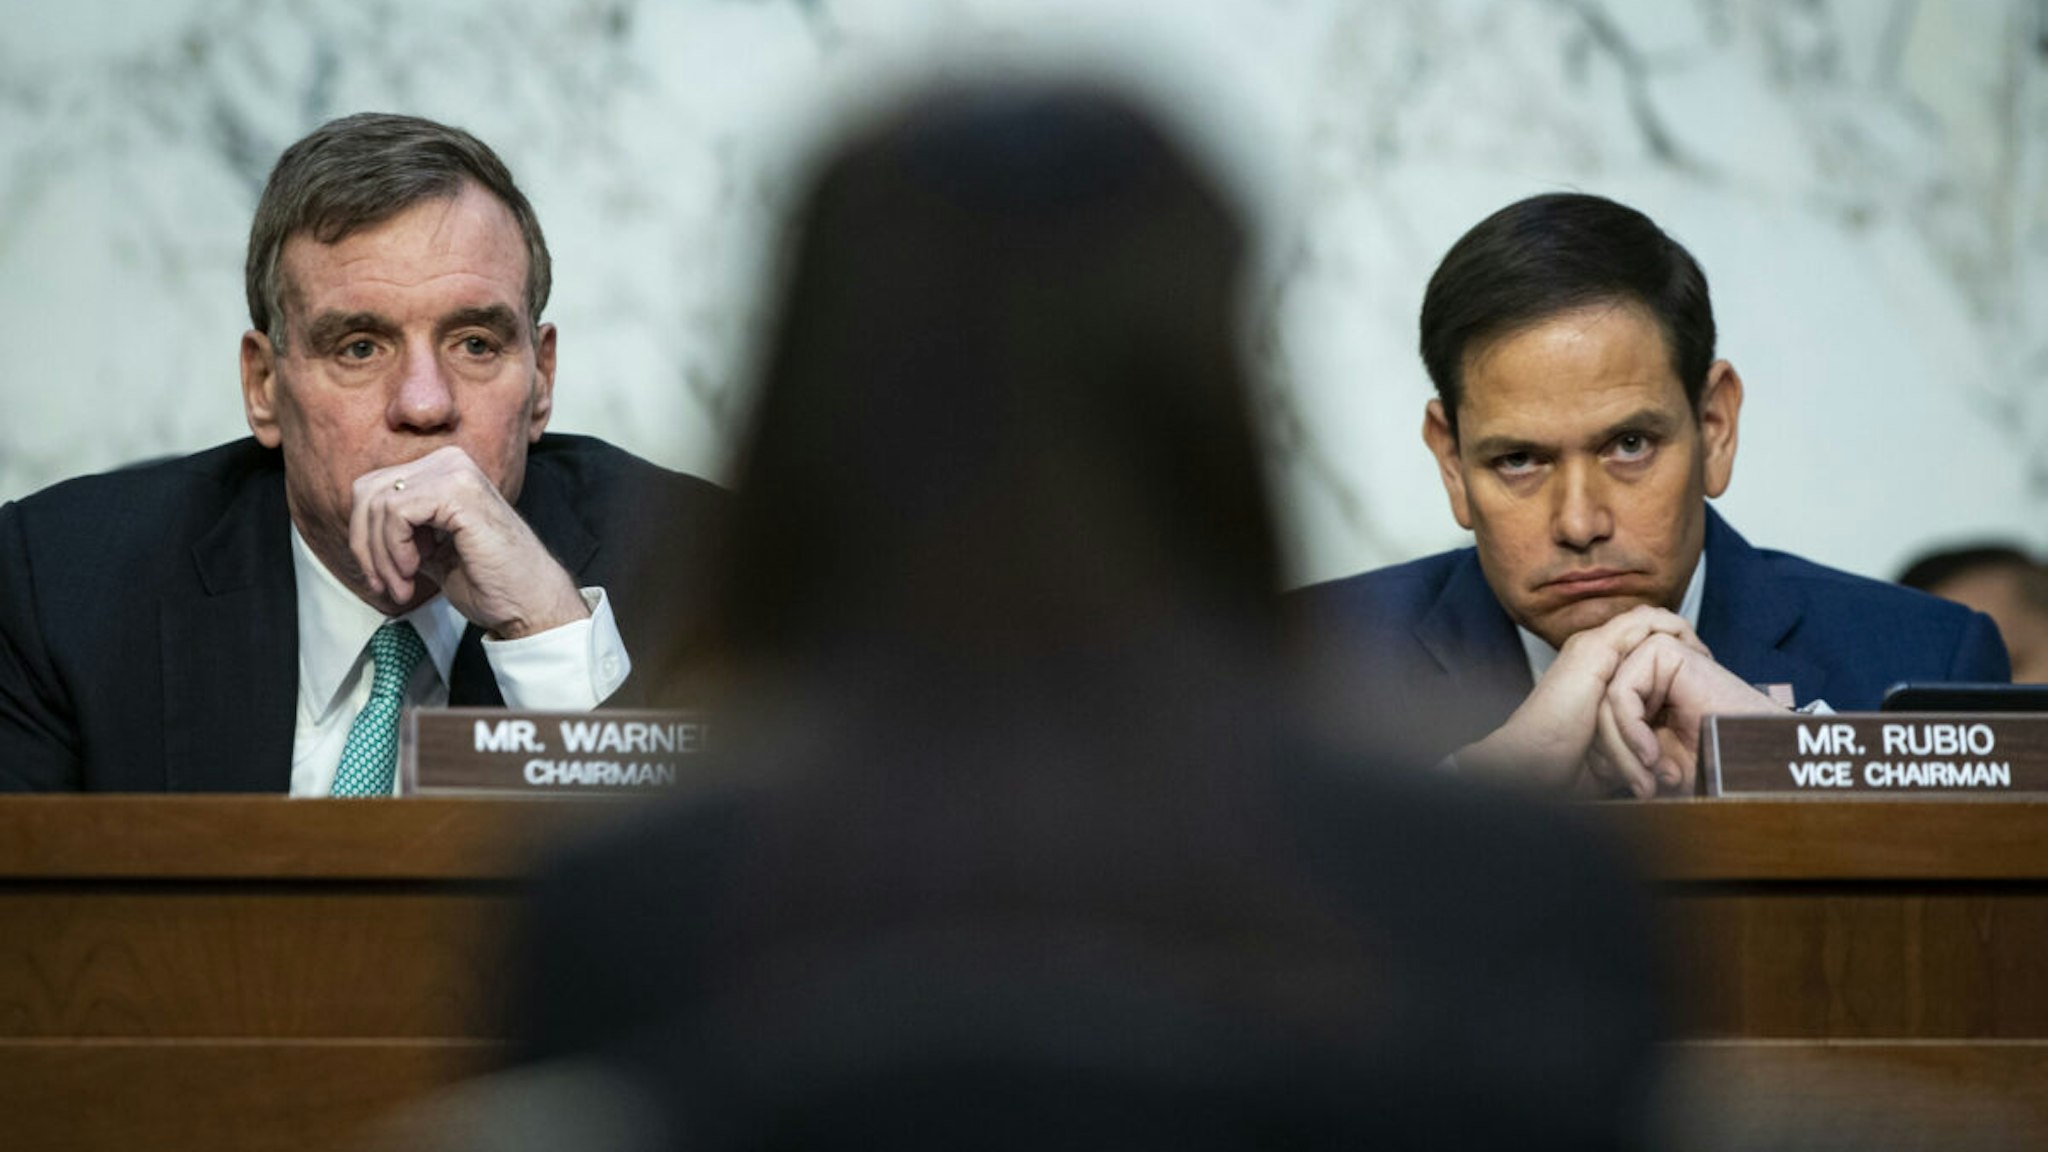 Senator Mark Warner, a Democrat from Virginia and chairman of the Senate Intelligence Committee, and Senator Marco Rubio, a Republican from Florida and ranking member of the Senate Intelligence Committee, during a hearing in Washington, D.C., U.S., on Thursday, March 10, 2022.